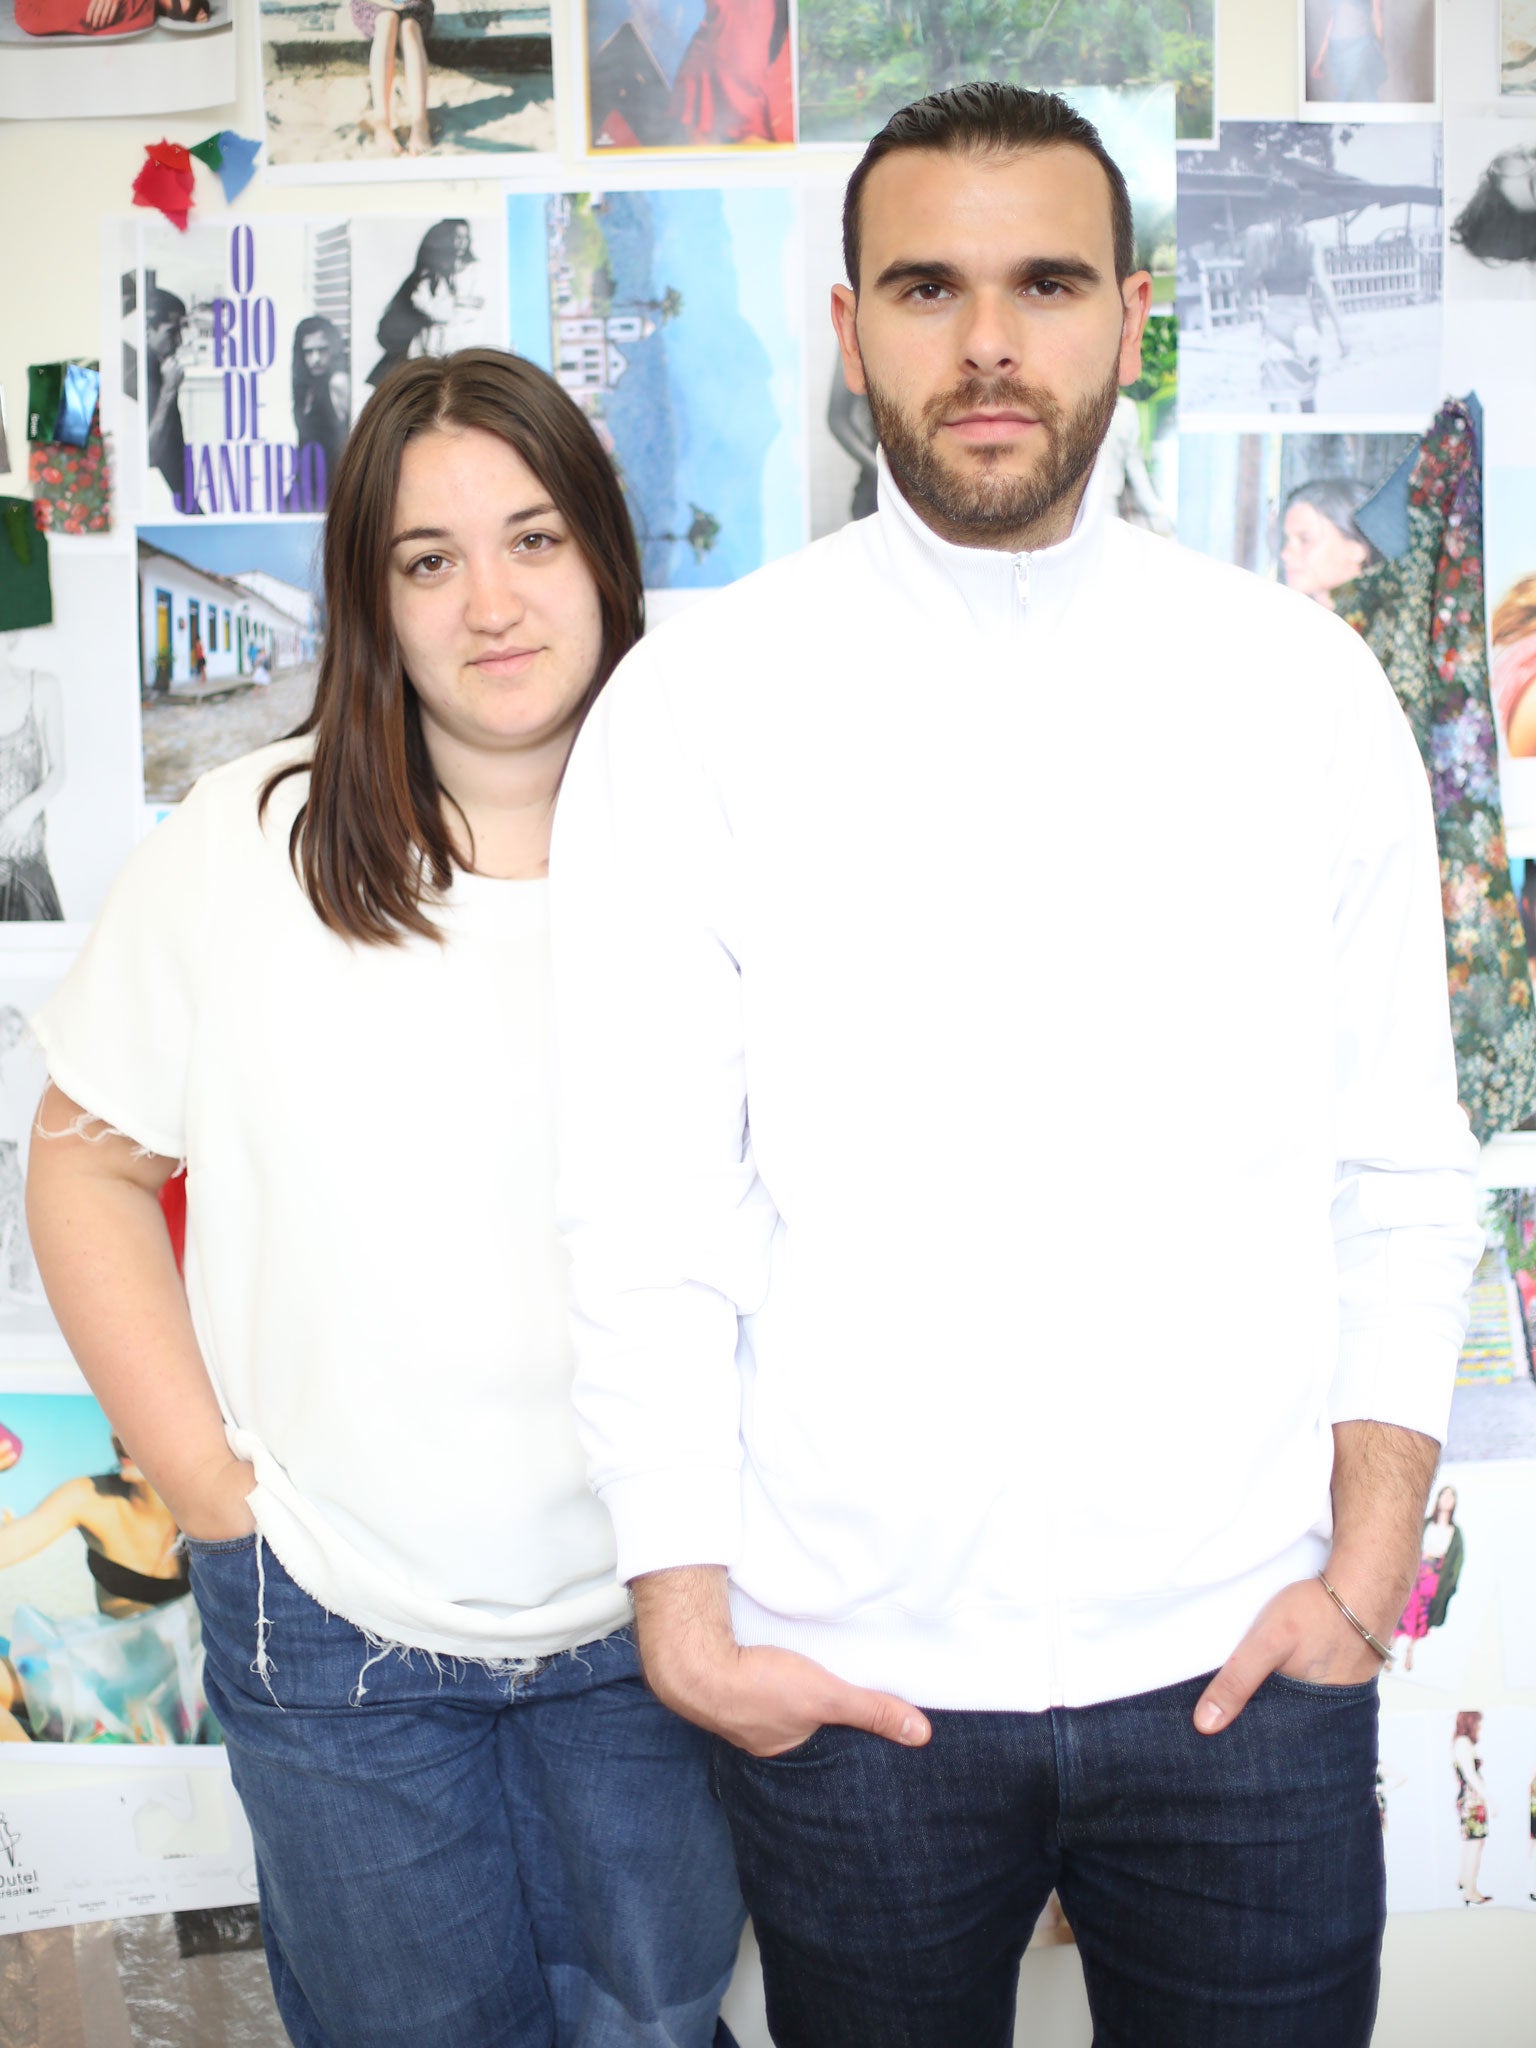 Fashion designer Marta Marques has launched her own womenswear label with her partner Paulo Almeida